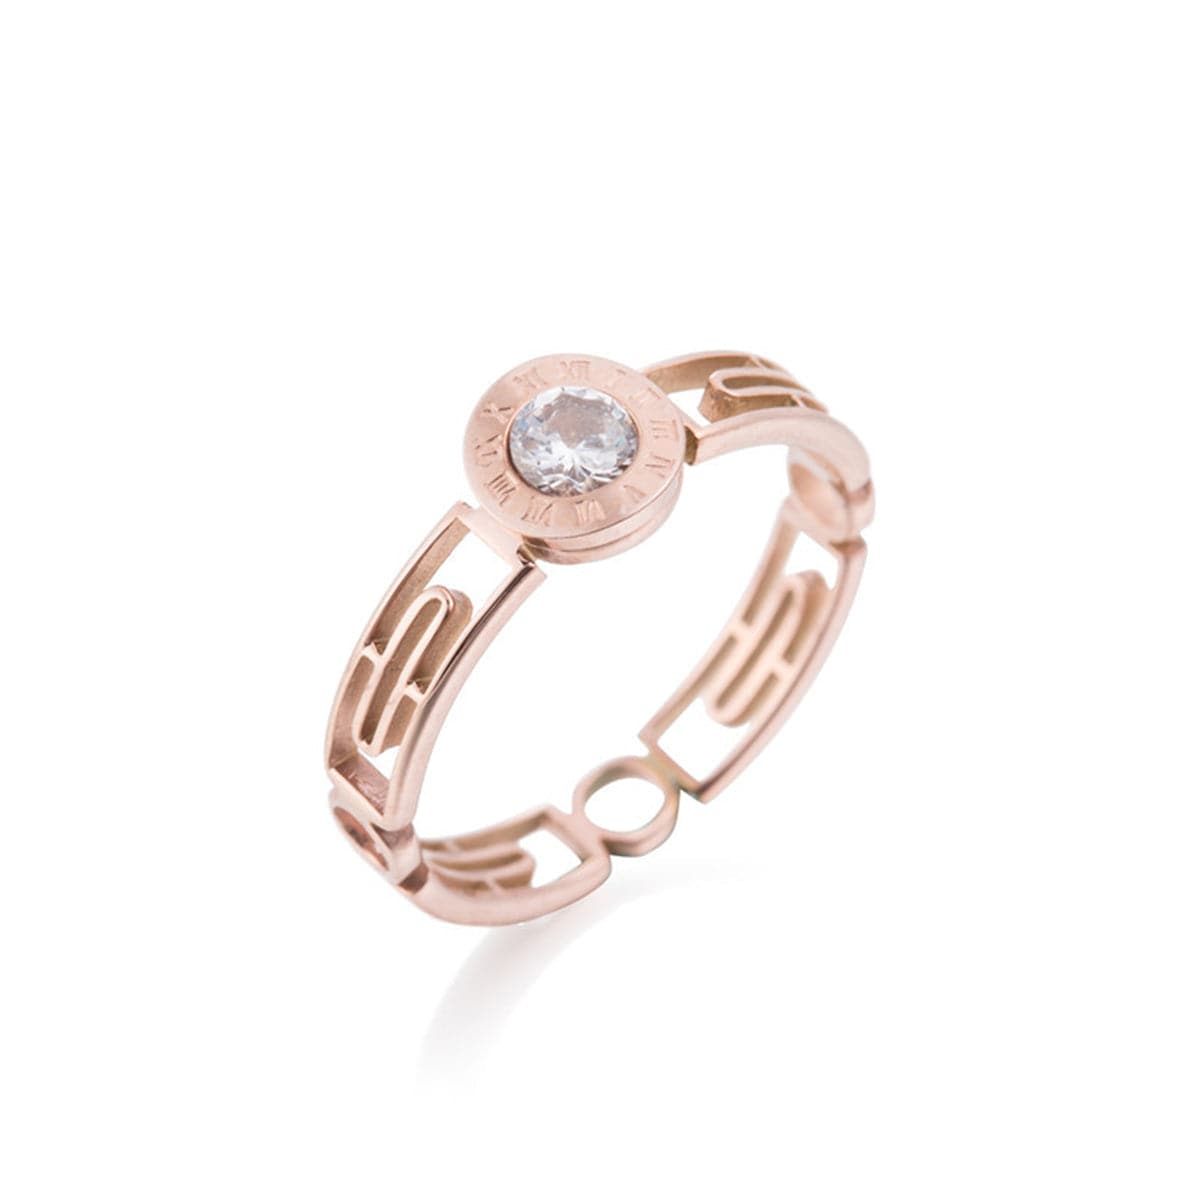 Crystal & 18k Rose Gold-Plated Roman Numeral Ring - streetregion